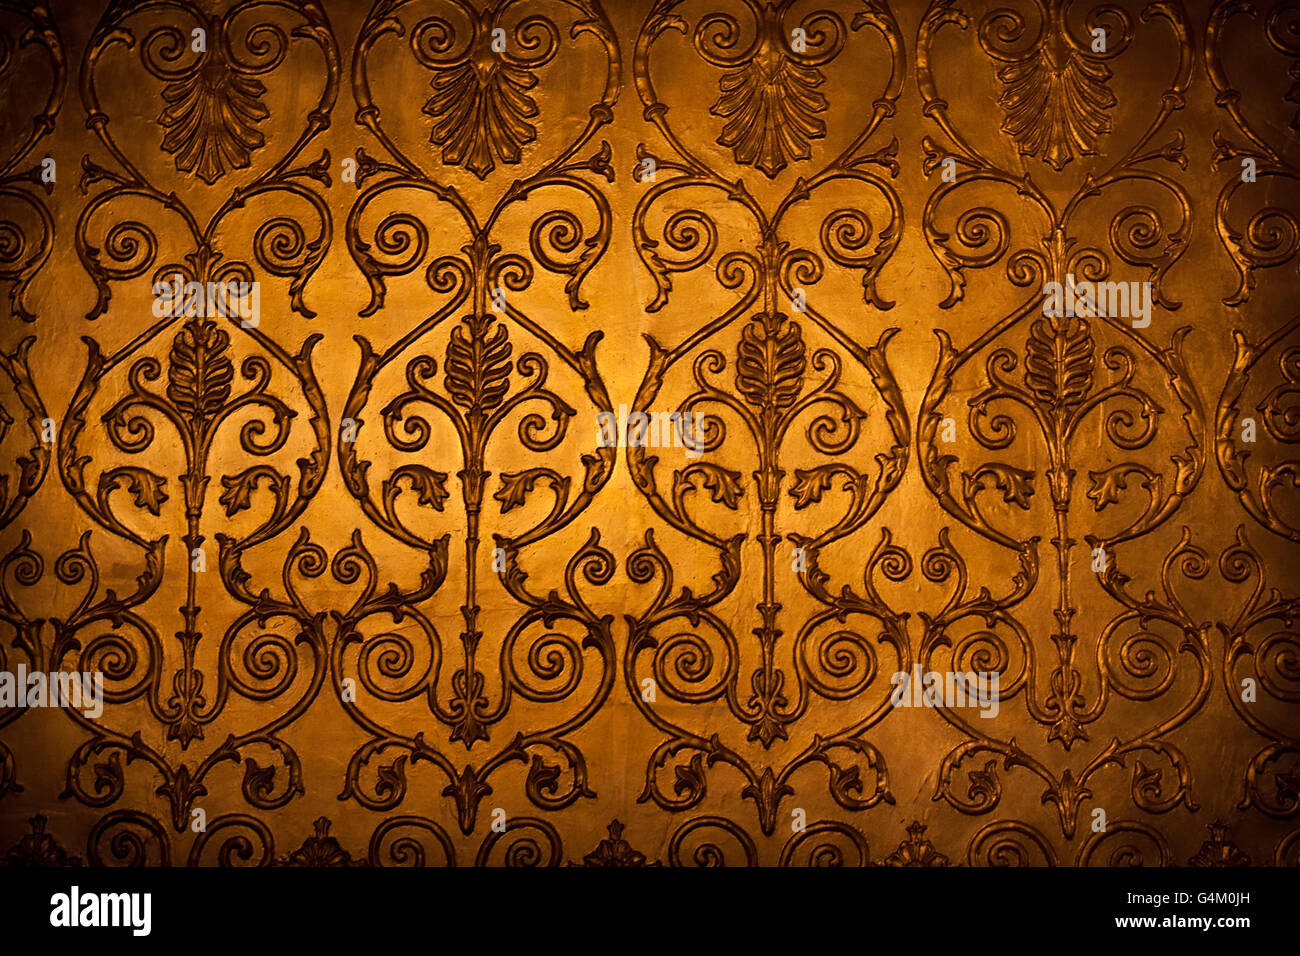 Antique decorative wall ornament in a palace Stock Photo